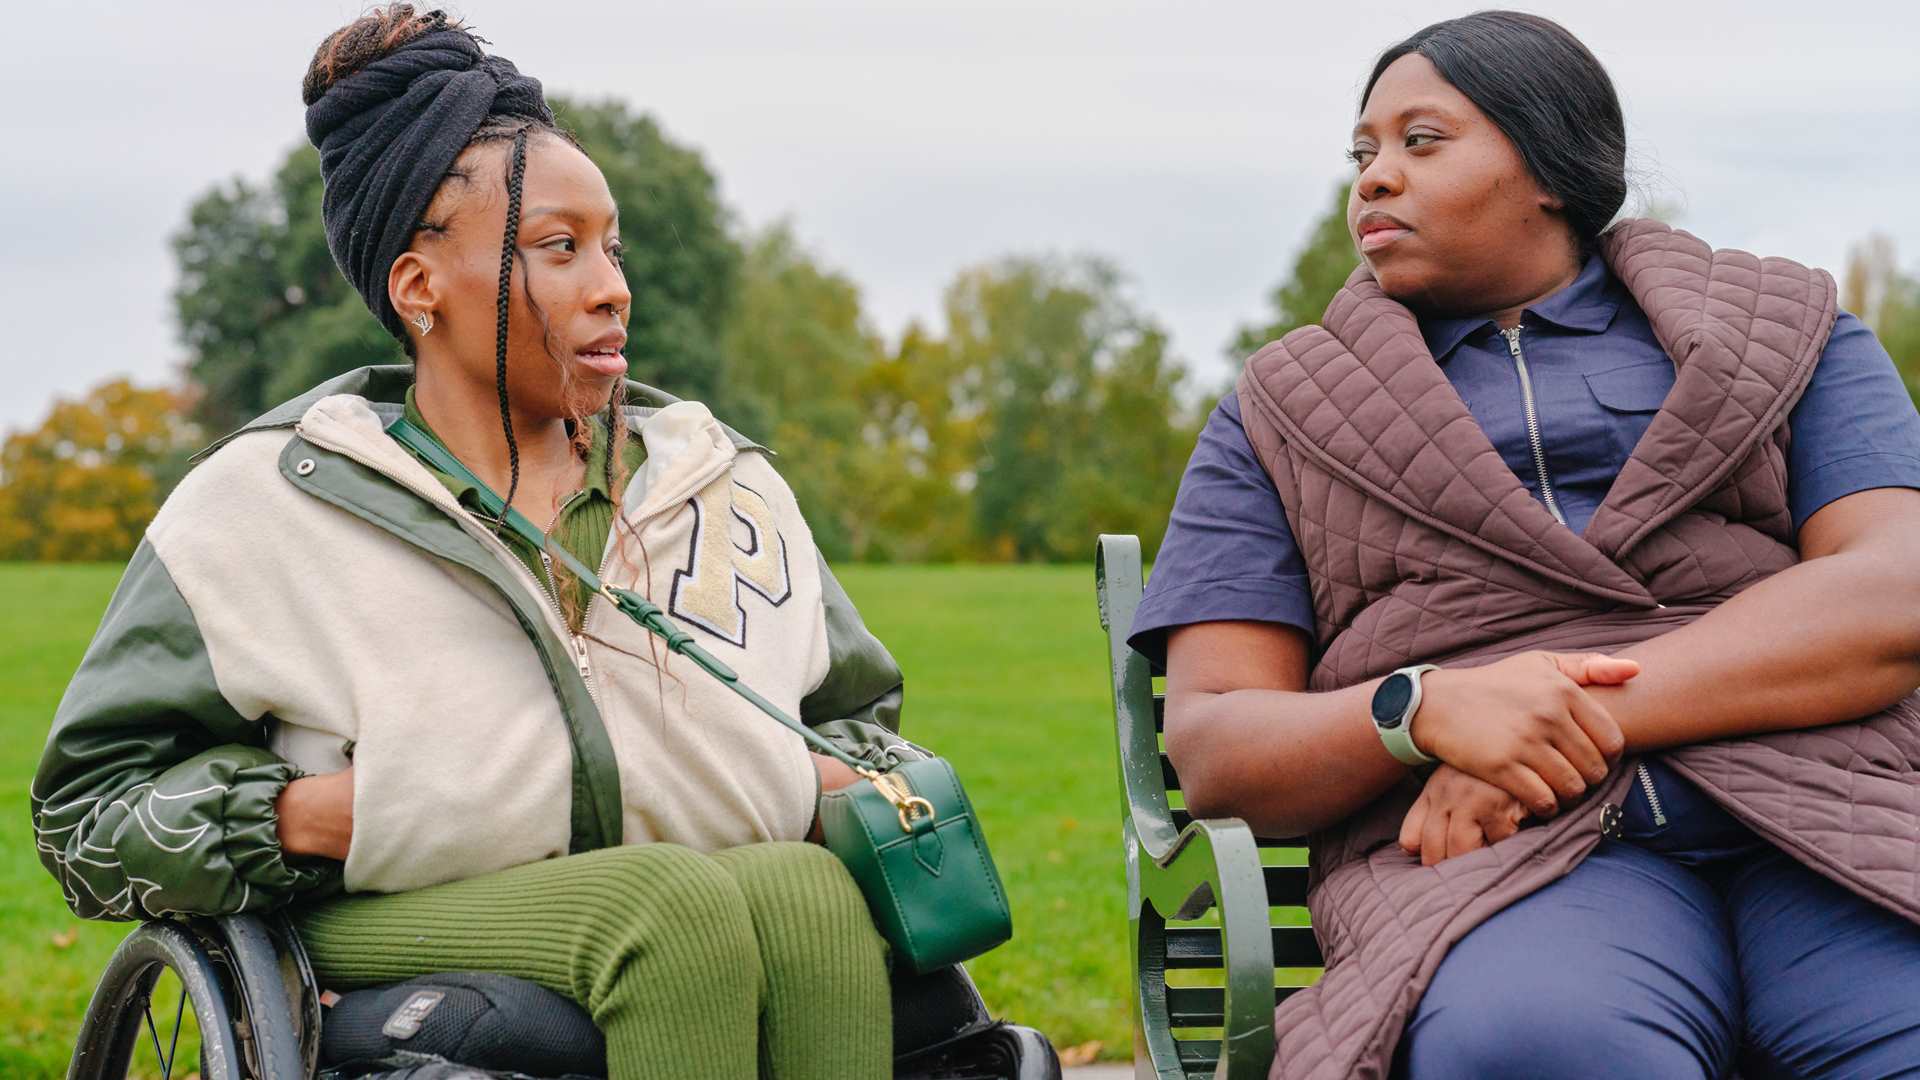 A young Black woman in a wheelchair and an older Black woman sitting on a bench in the park. They are talking about something serious.